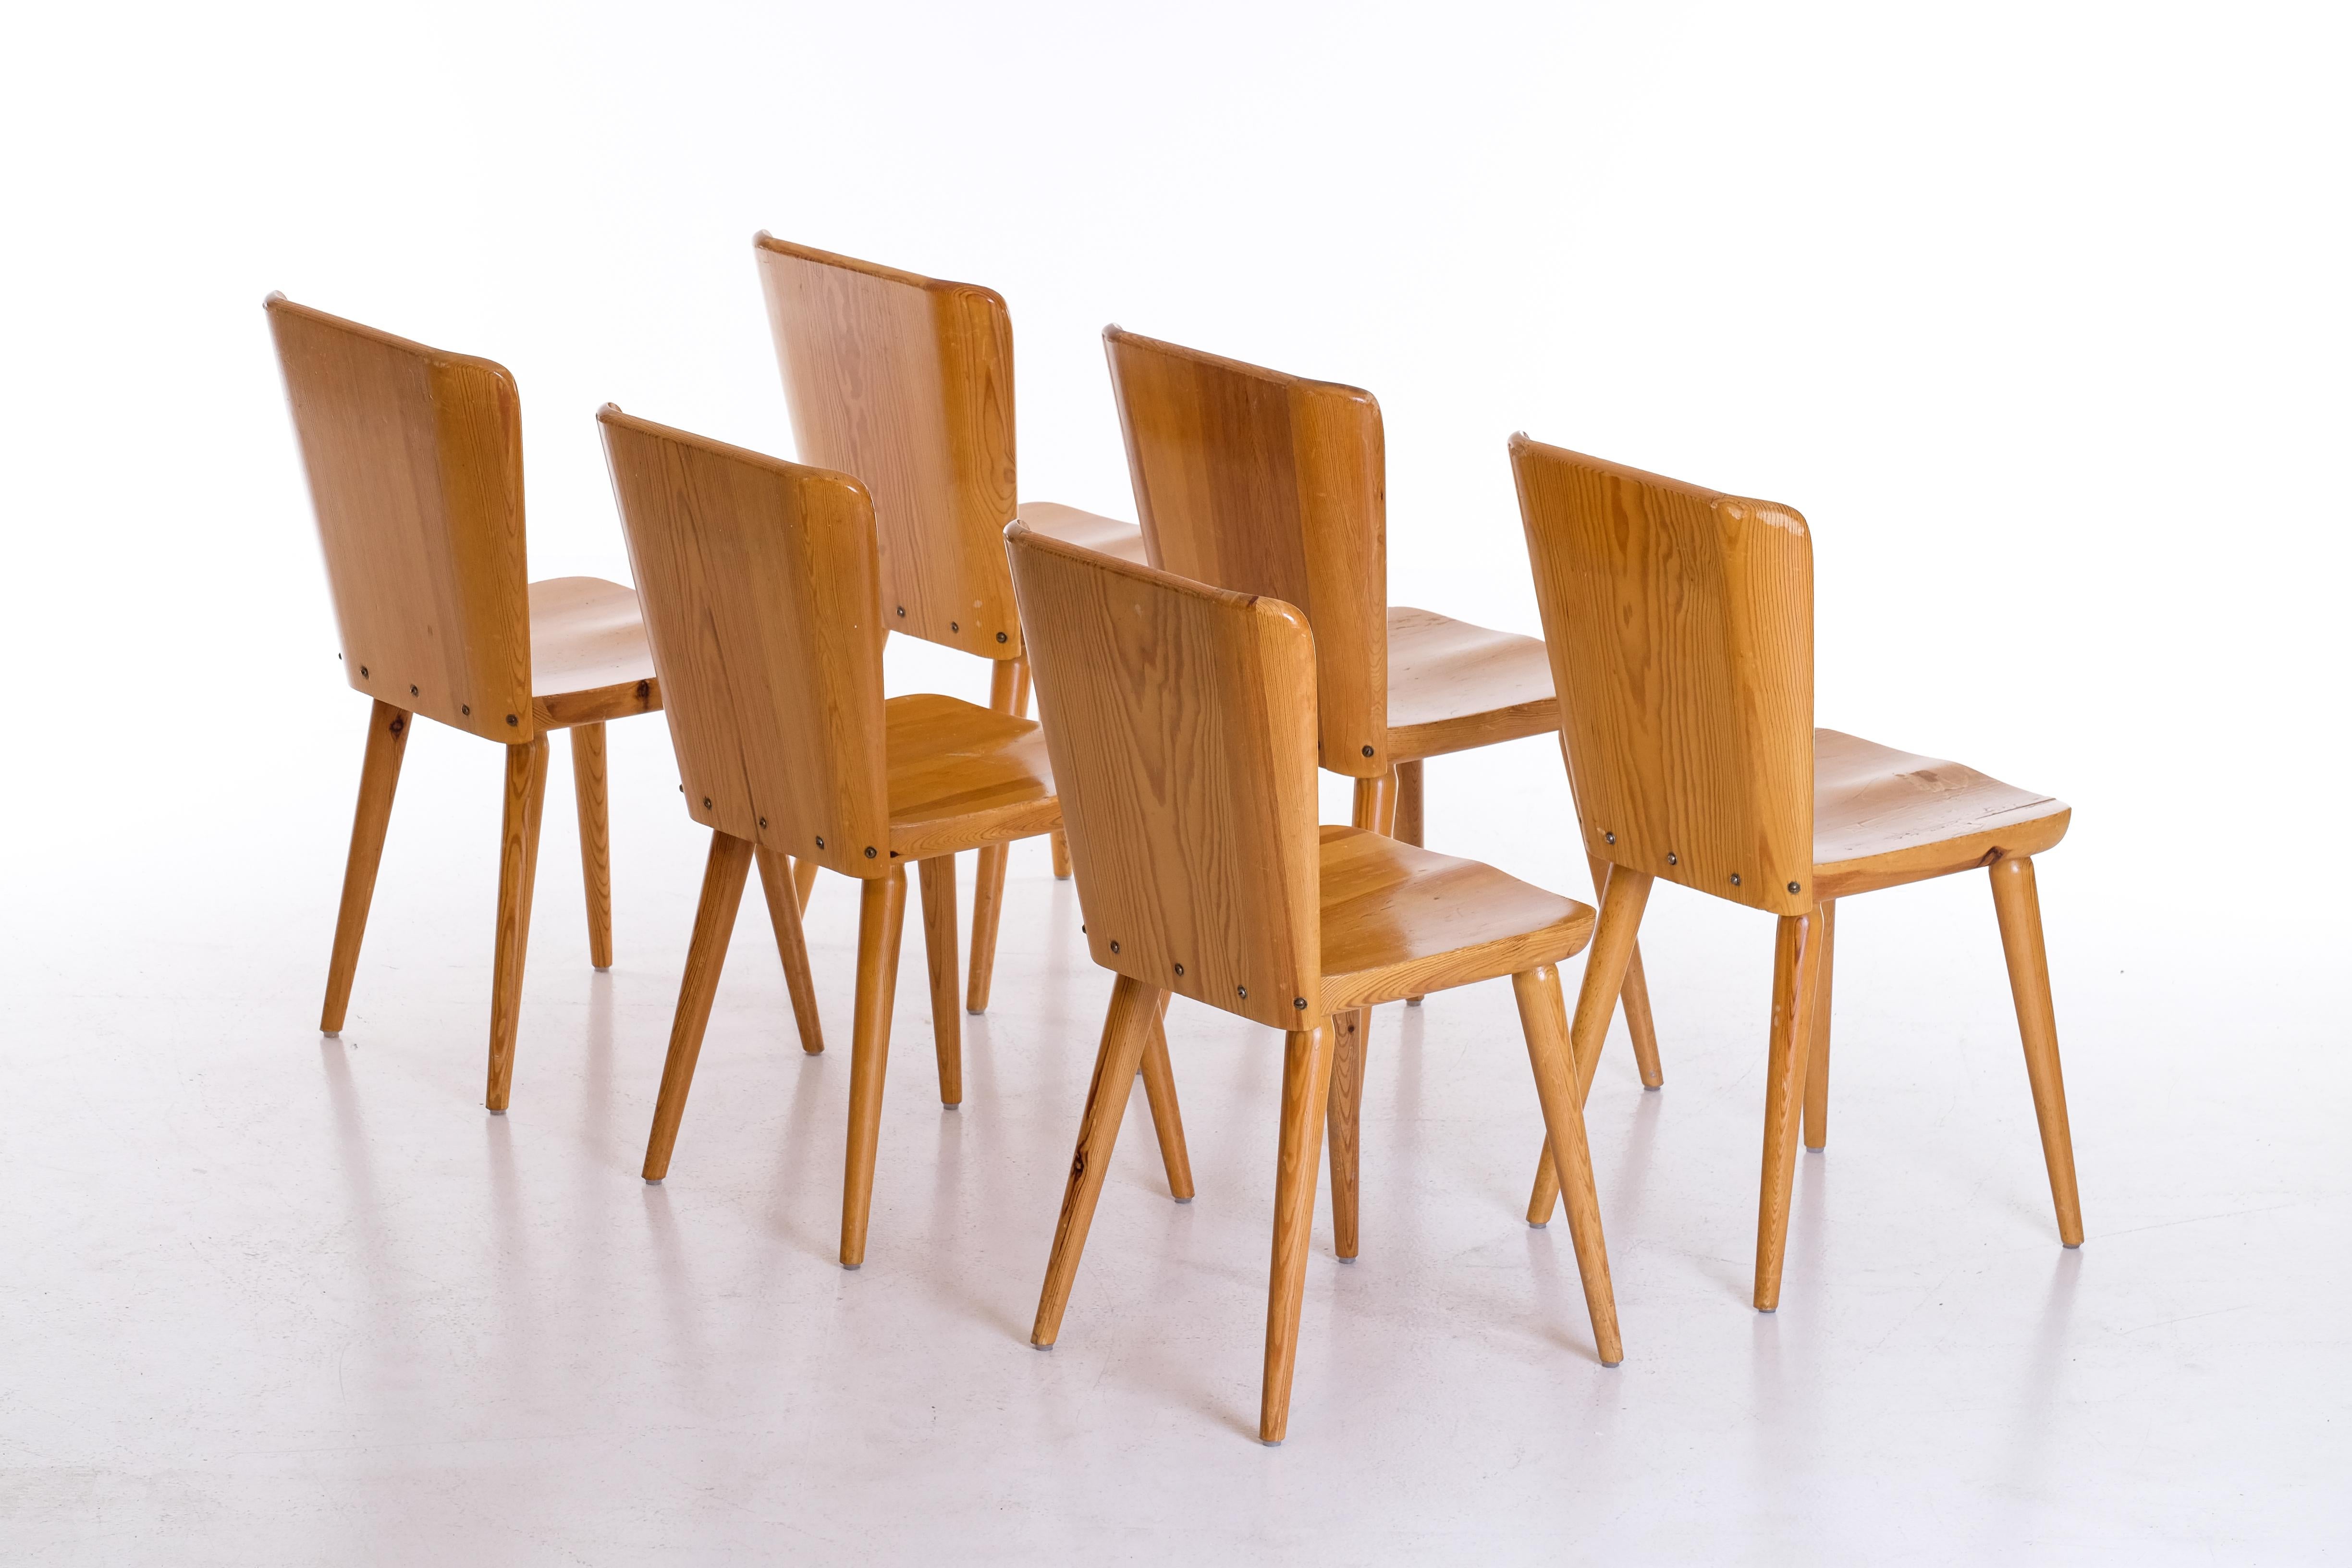 Set of 6 Swedish Pine Chairs by Göran Malmvall, Svensk Fur, 1960s In Good Condition For Sale In Stockholm, SE